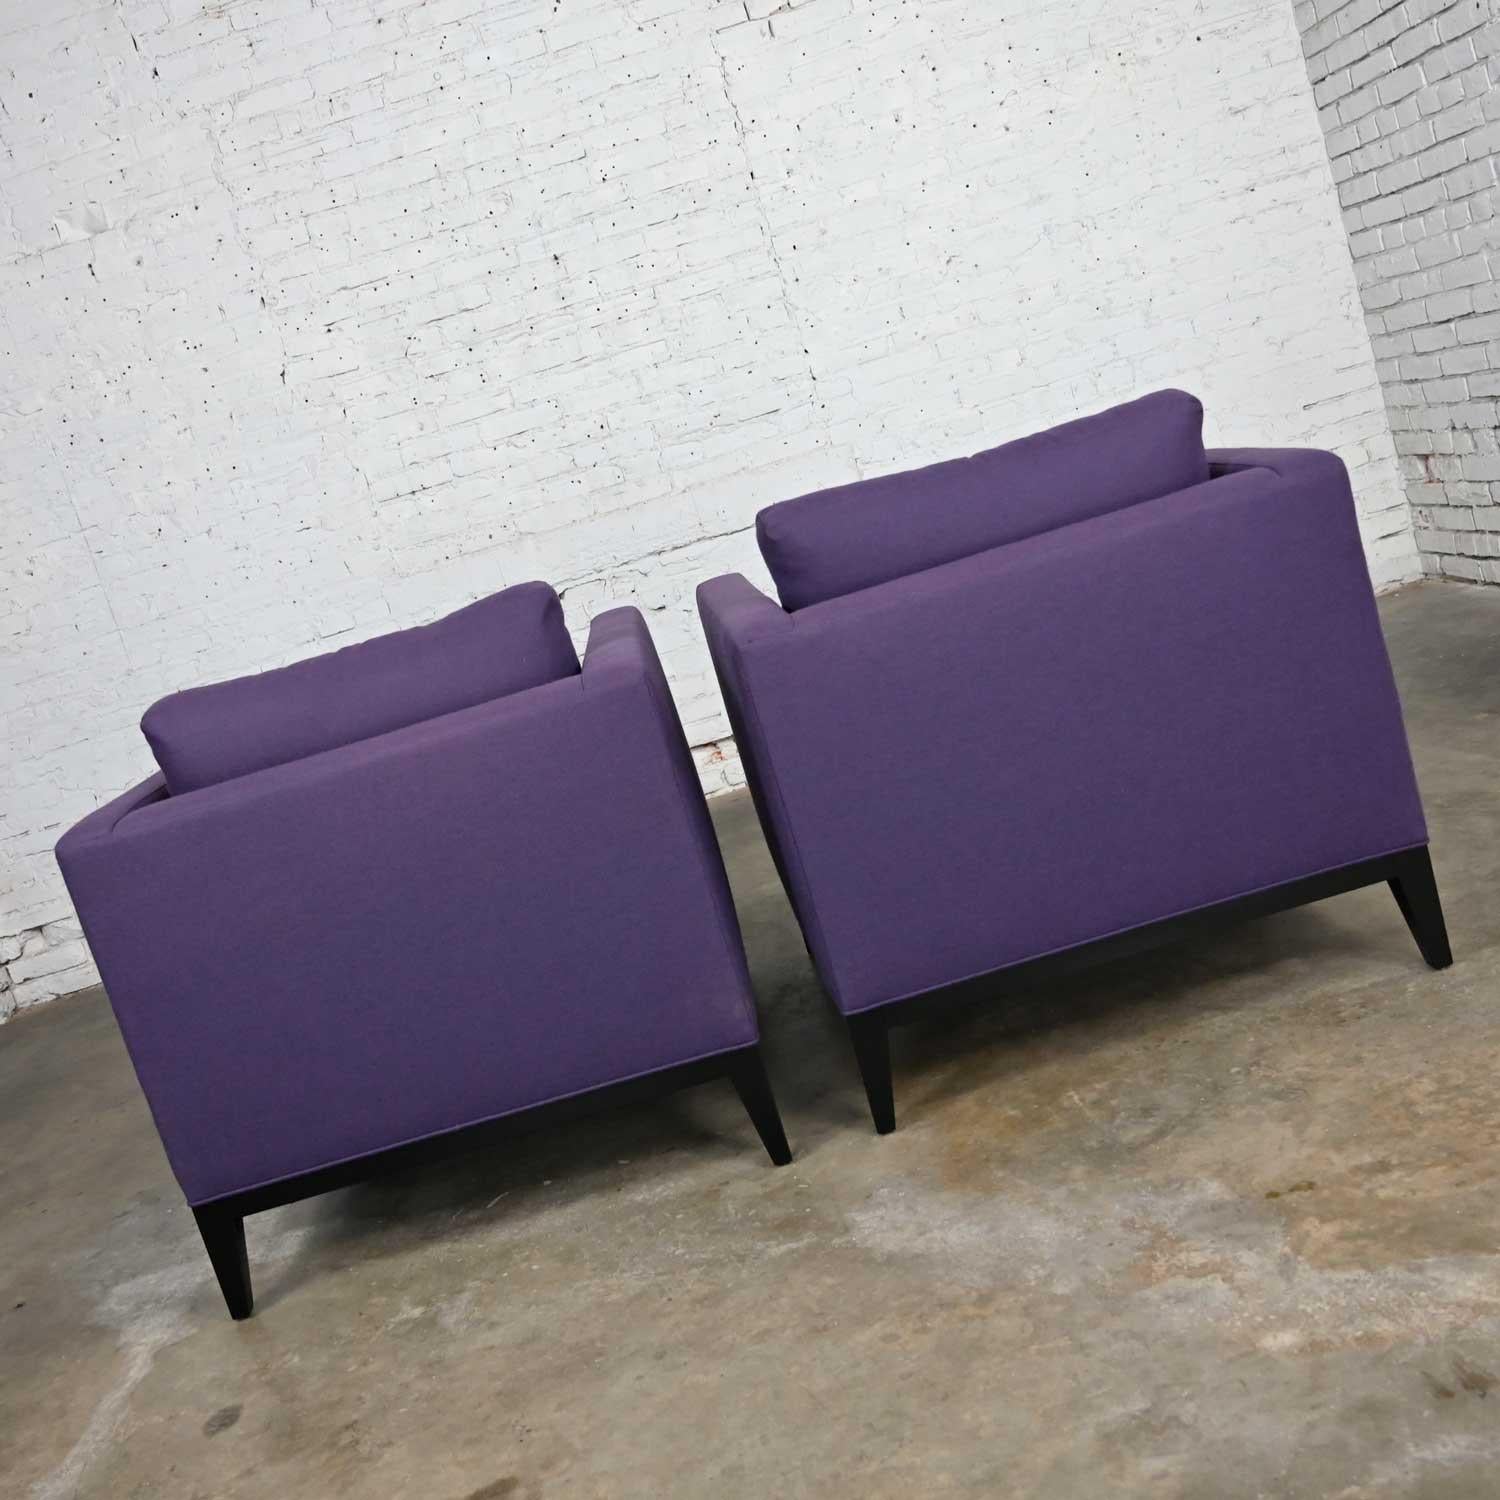 20th Century Modern Purple Plum Tone Tuxedo Style Club Chairs by Baker a Pair For Sale